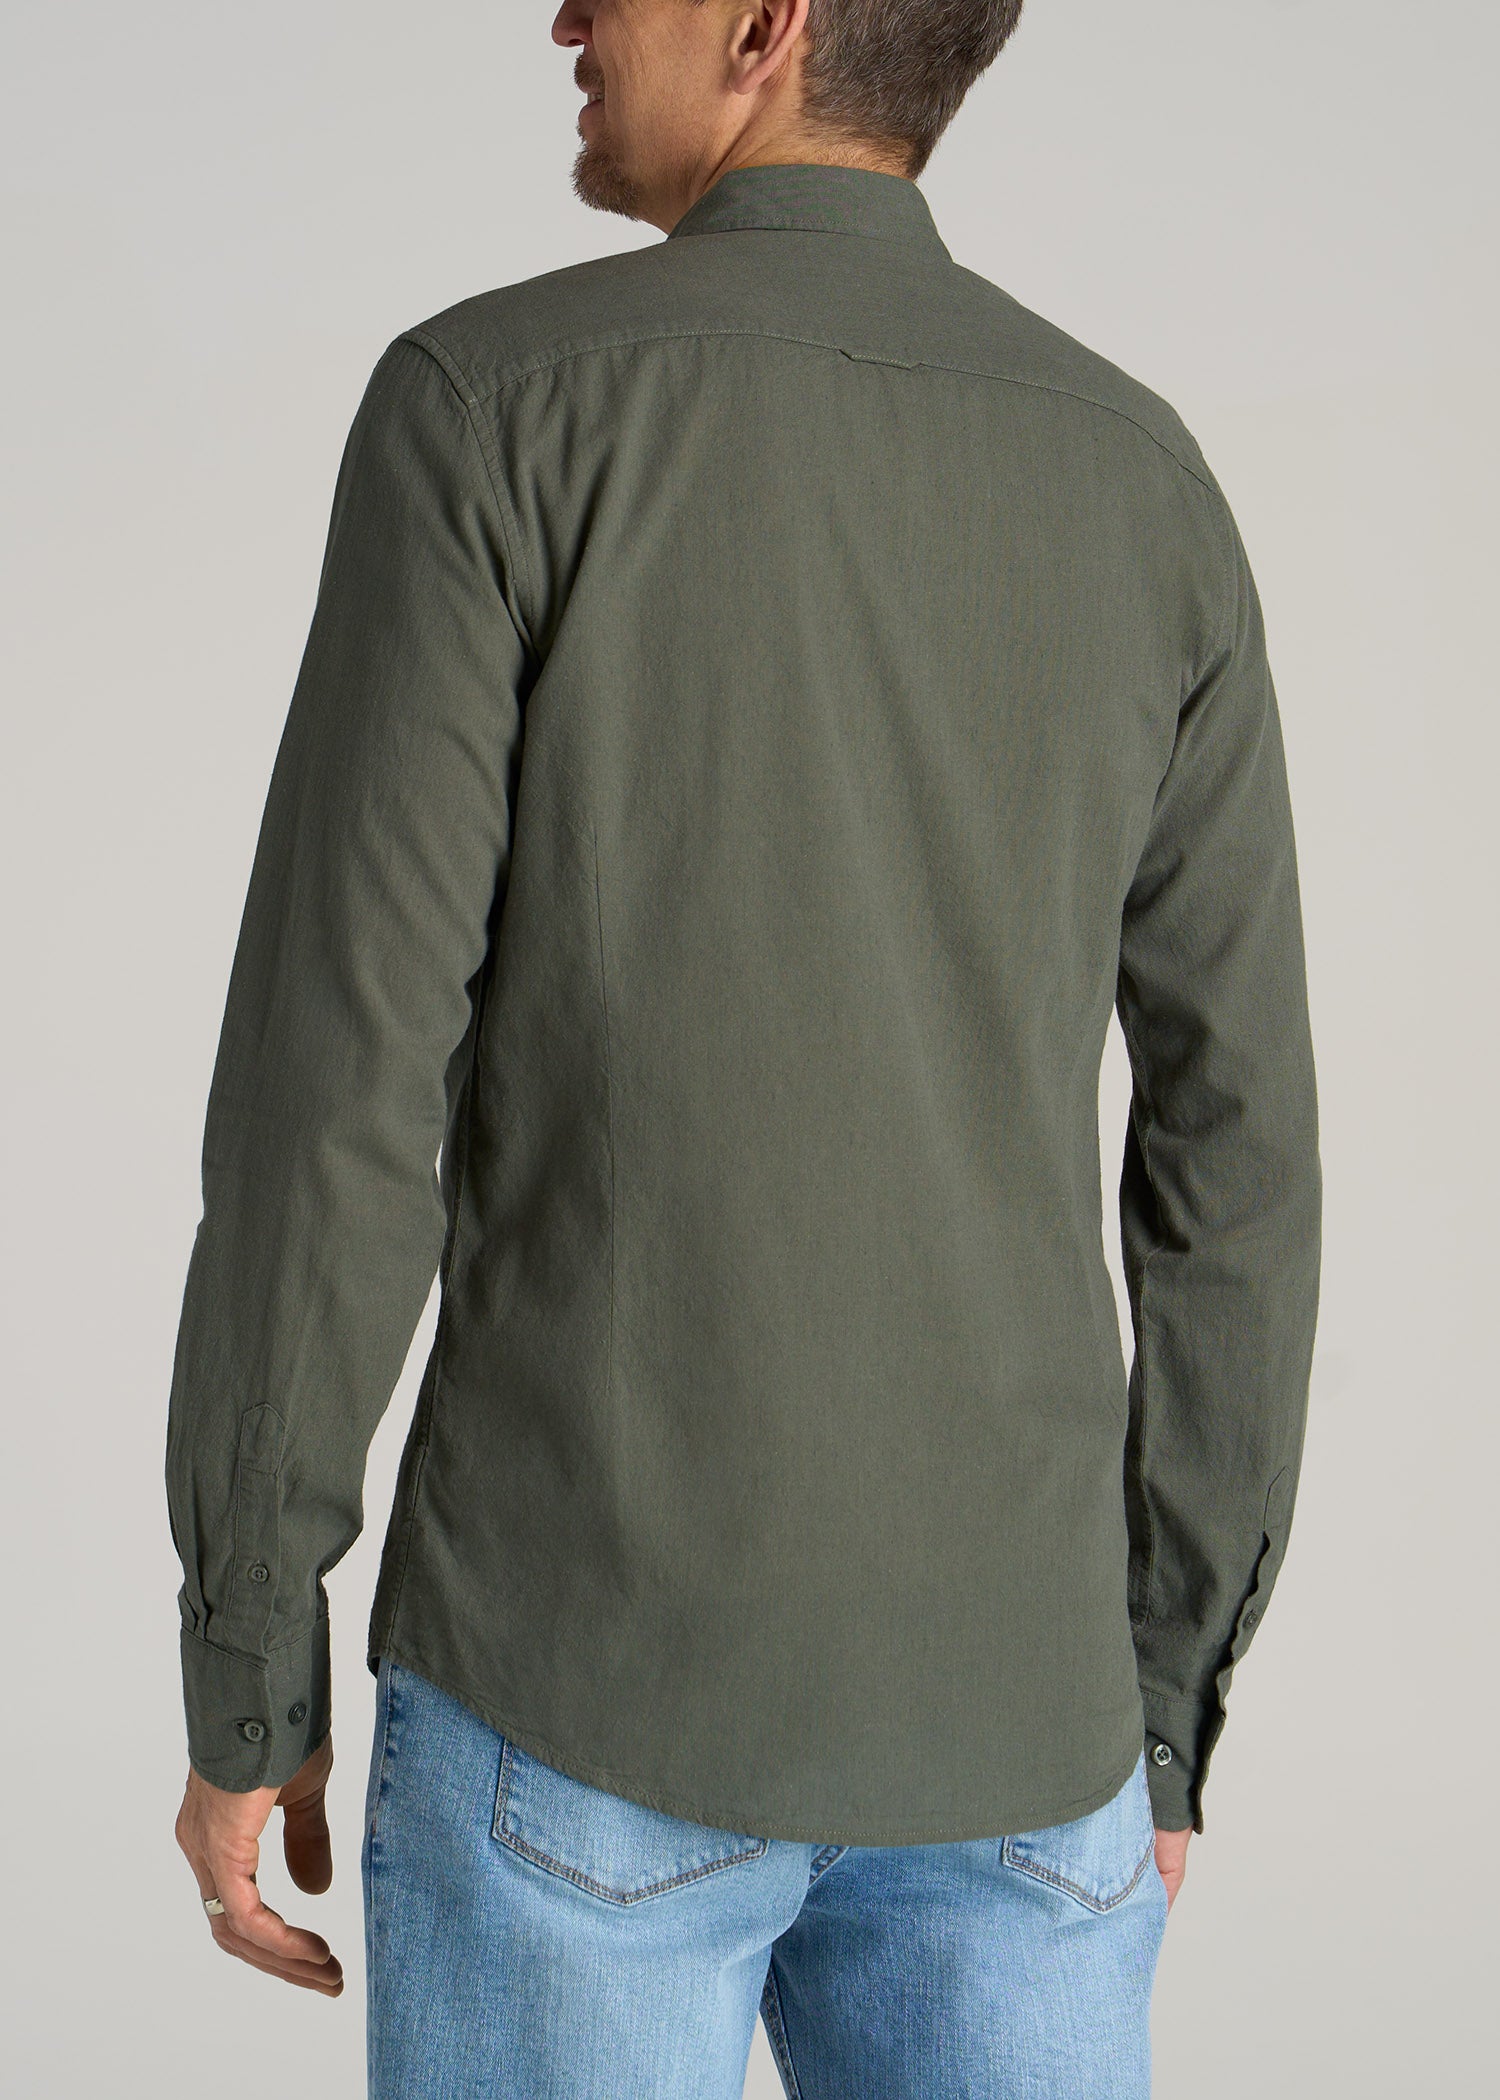 Linen Long Sleeve Shirt for Tall Men Spring Olive | American Tall